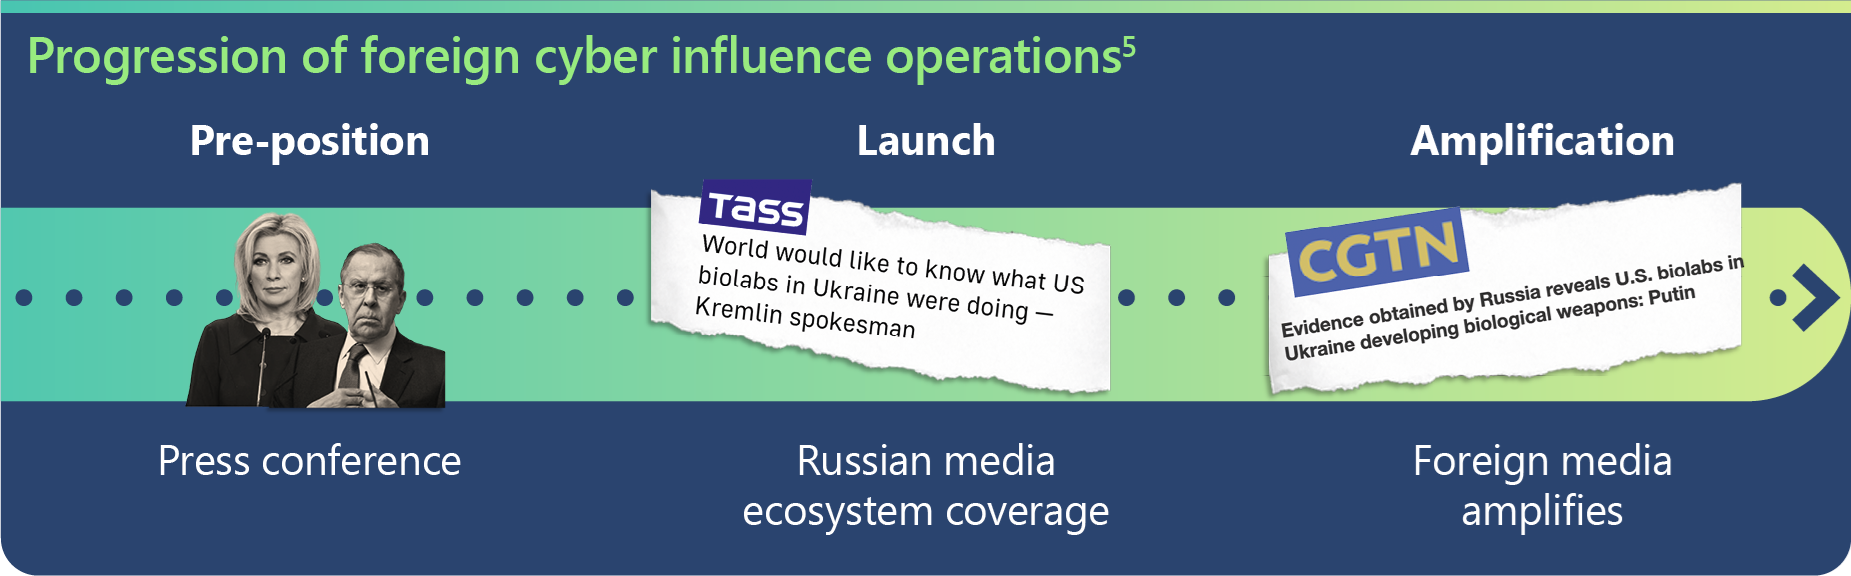 Preposition launch and amplification of cyber influence operations